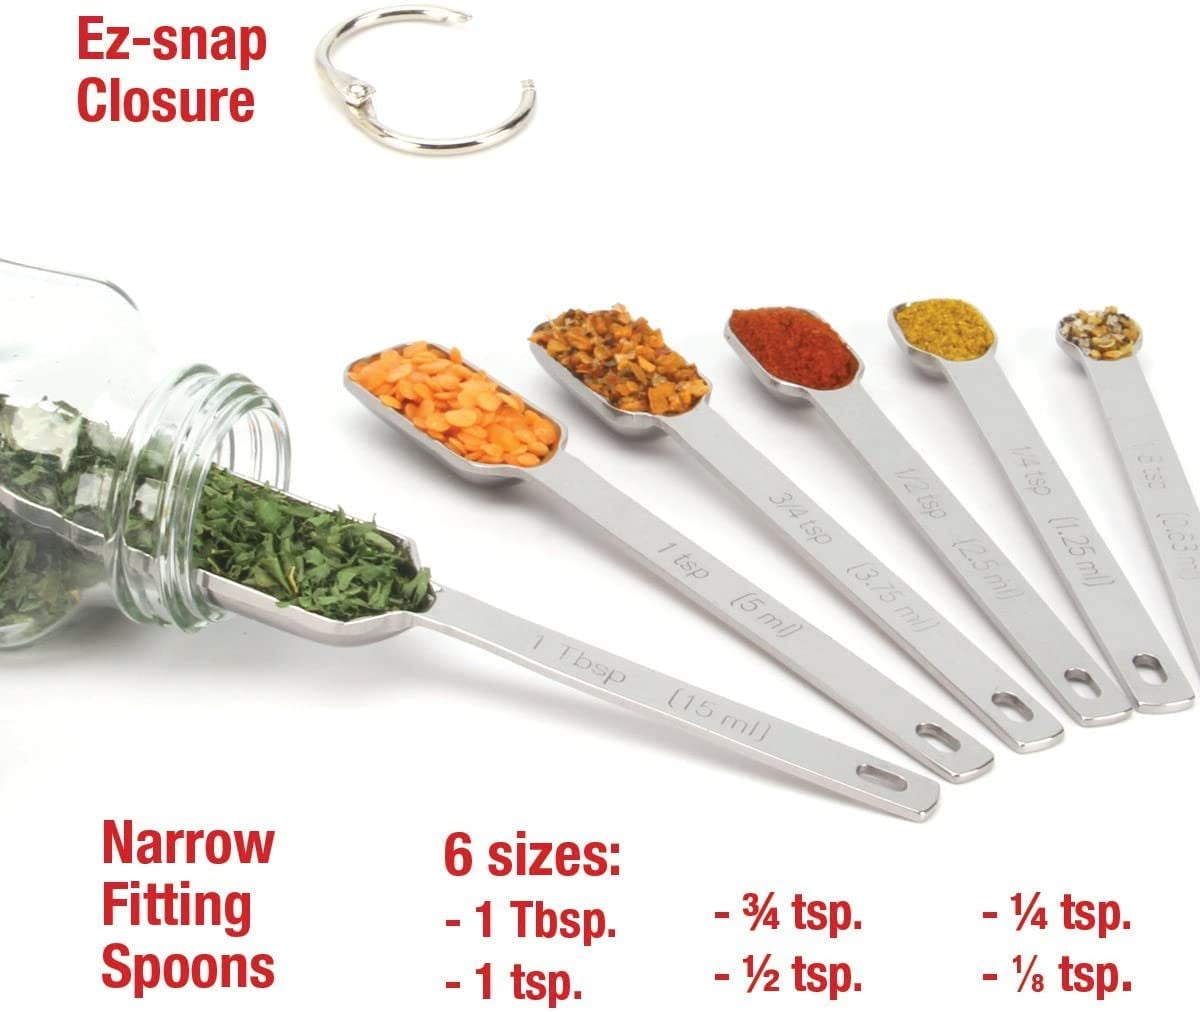 Kalsreui Plastic Measuring Cups and Spoons Set 15, 7 Dry&Liquid Measuring  Cup Spoon Set, 7 Spice Long Handle Measuring Spoons with 1 Leveler for